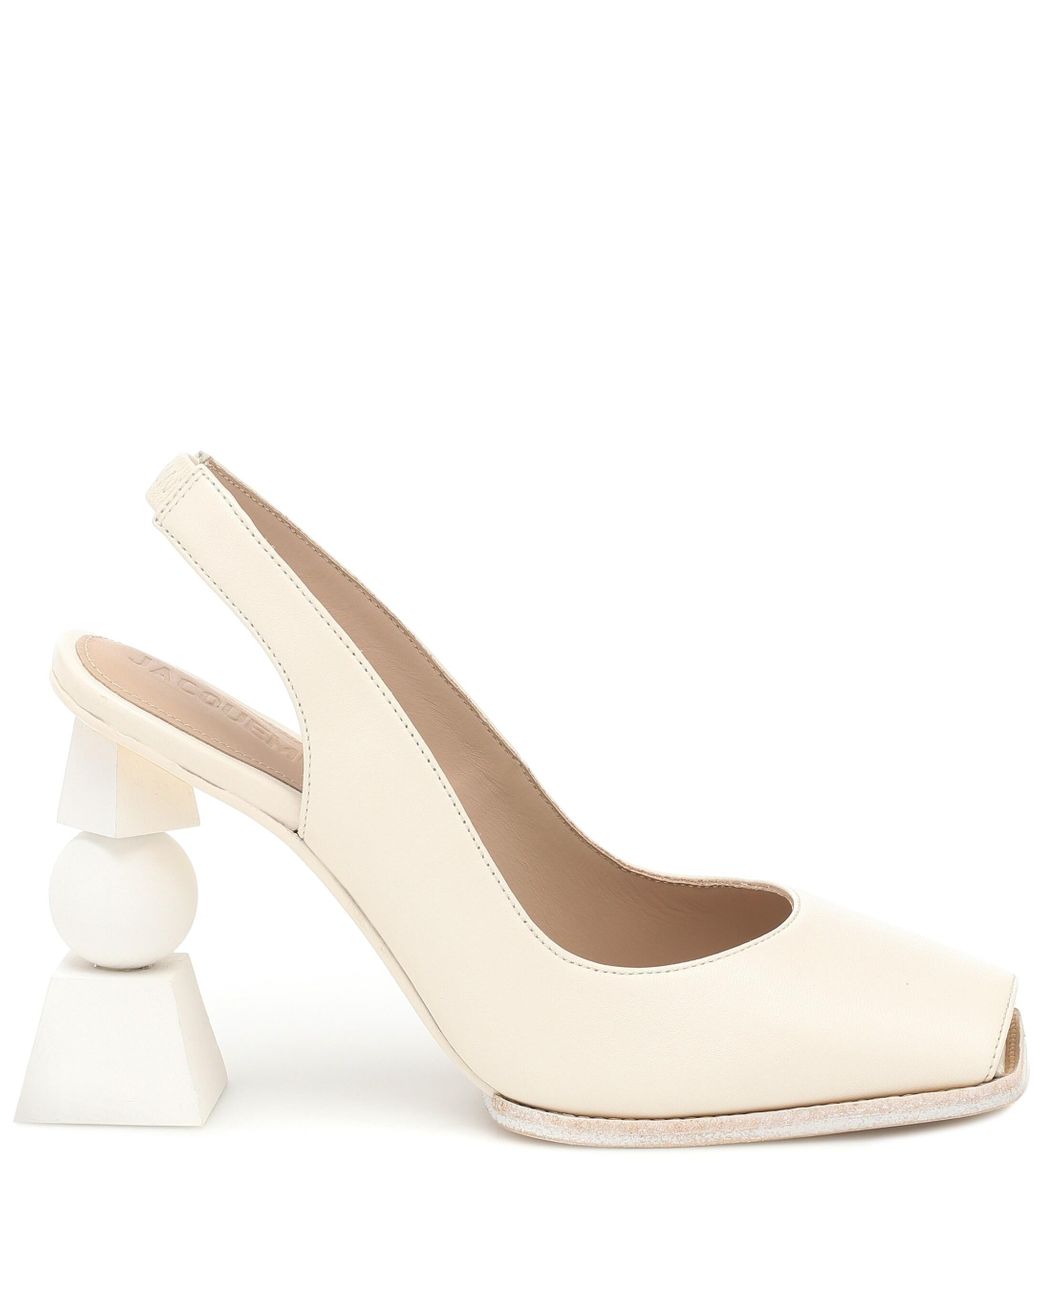 Jacquemus Les Chaussures Valerie Leather Pumps in White | Lyst